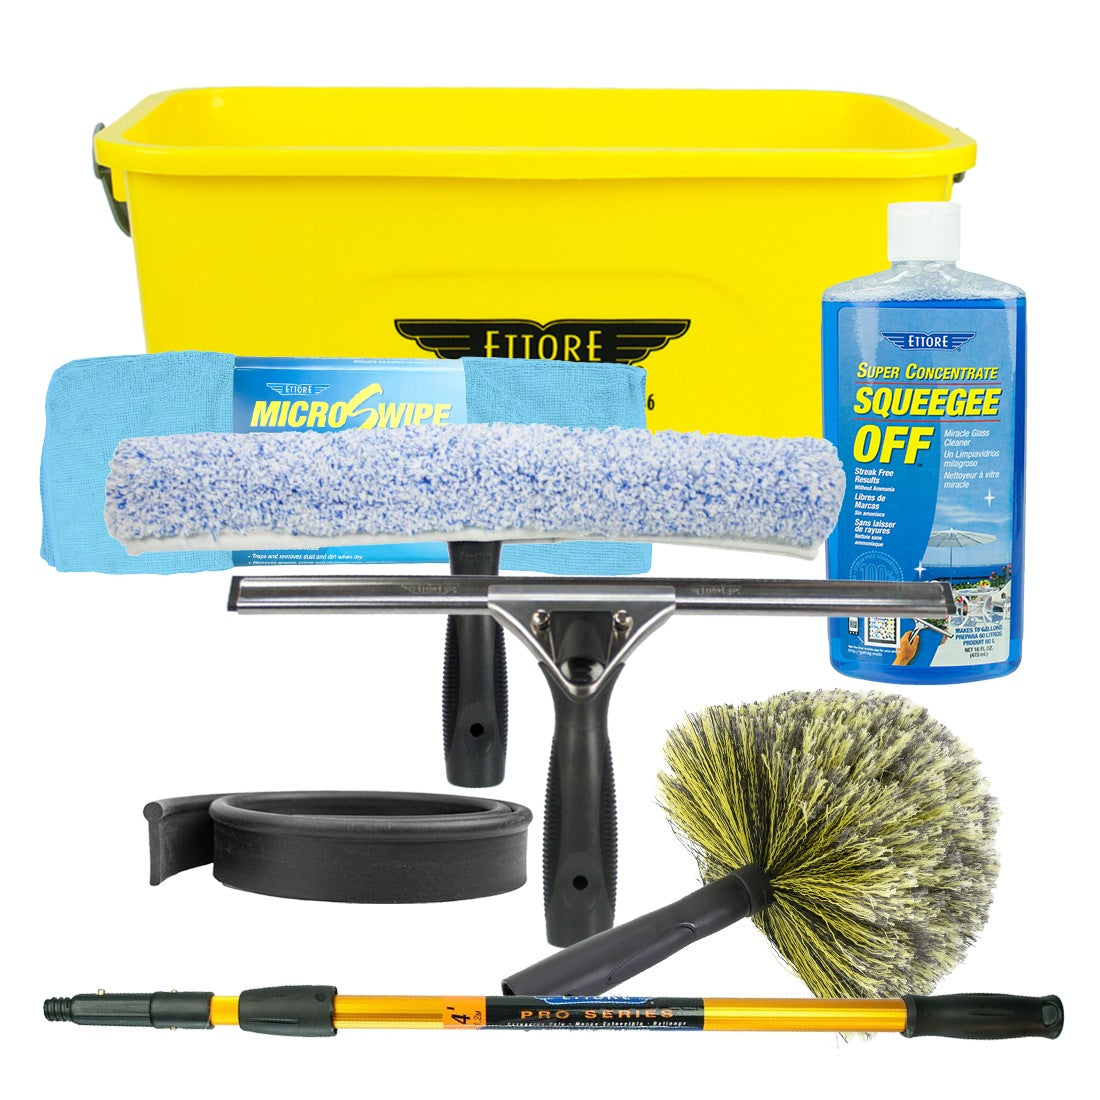 Ettore Cleaning and Dusting Kit Front View